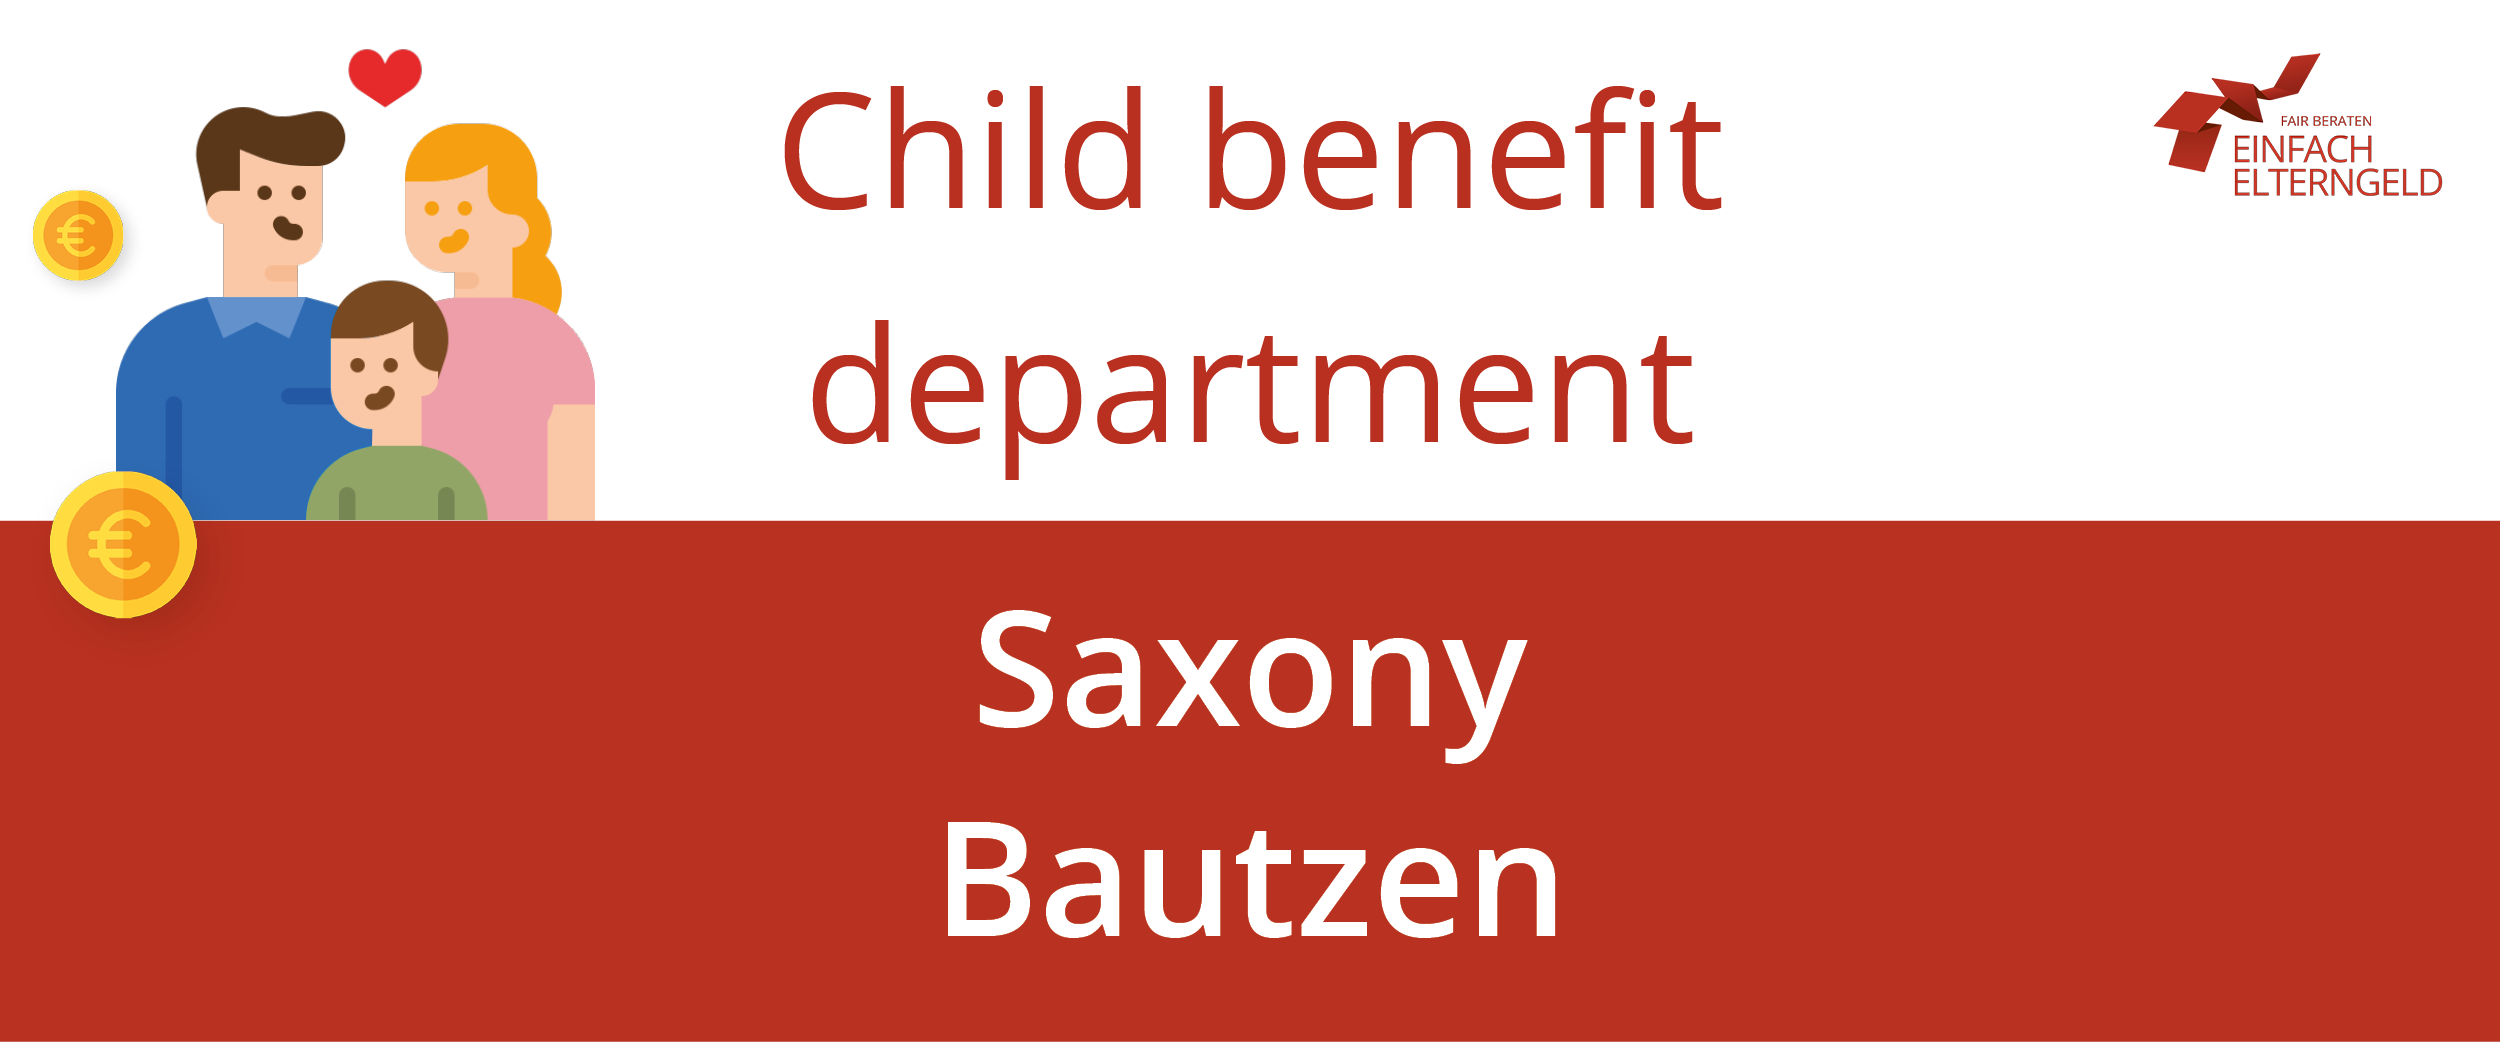 We introduce to you the Child benefit department Saxony Bautzen.